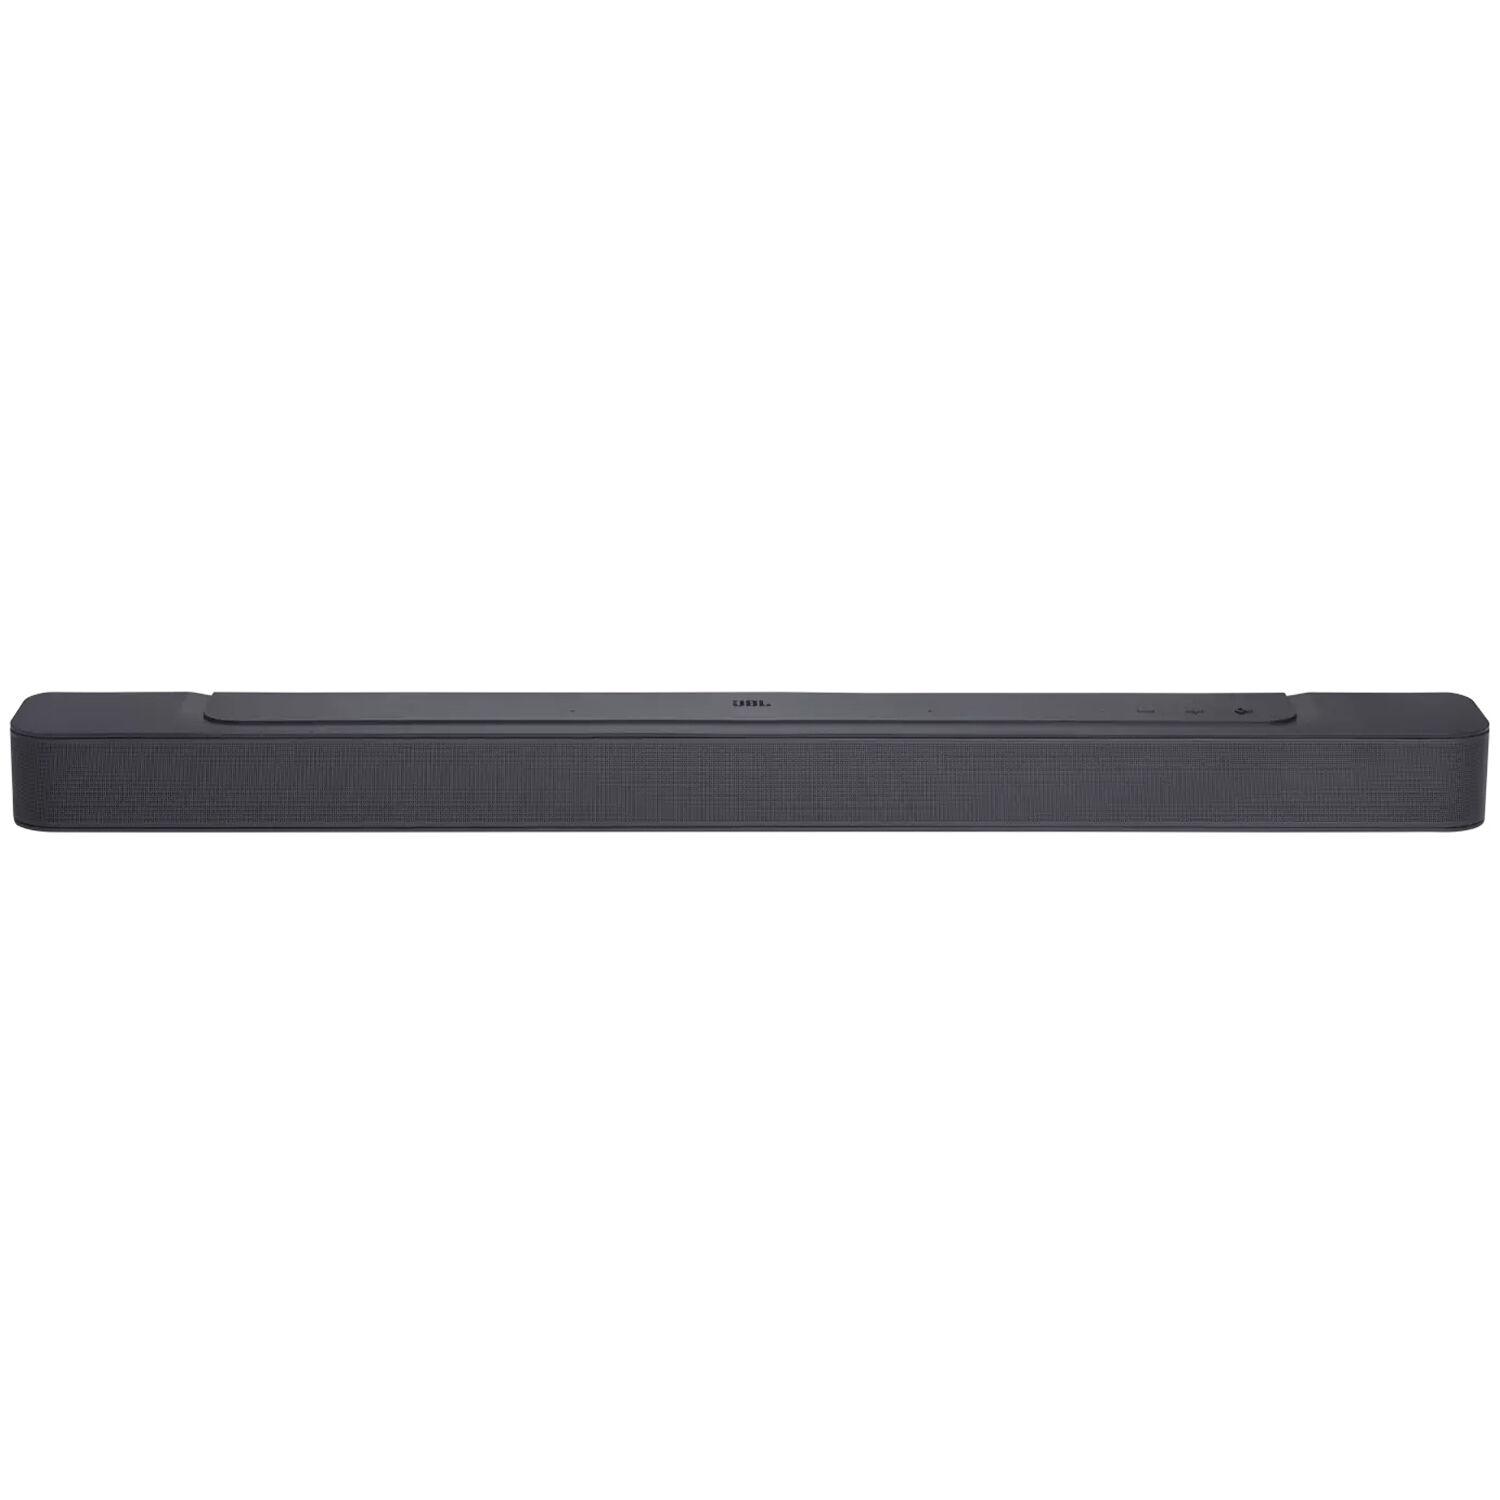 JBL - BAR 300 5.0ch Compact Dolby Atmos All-In-One Soundbar with 